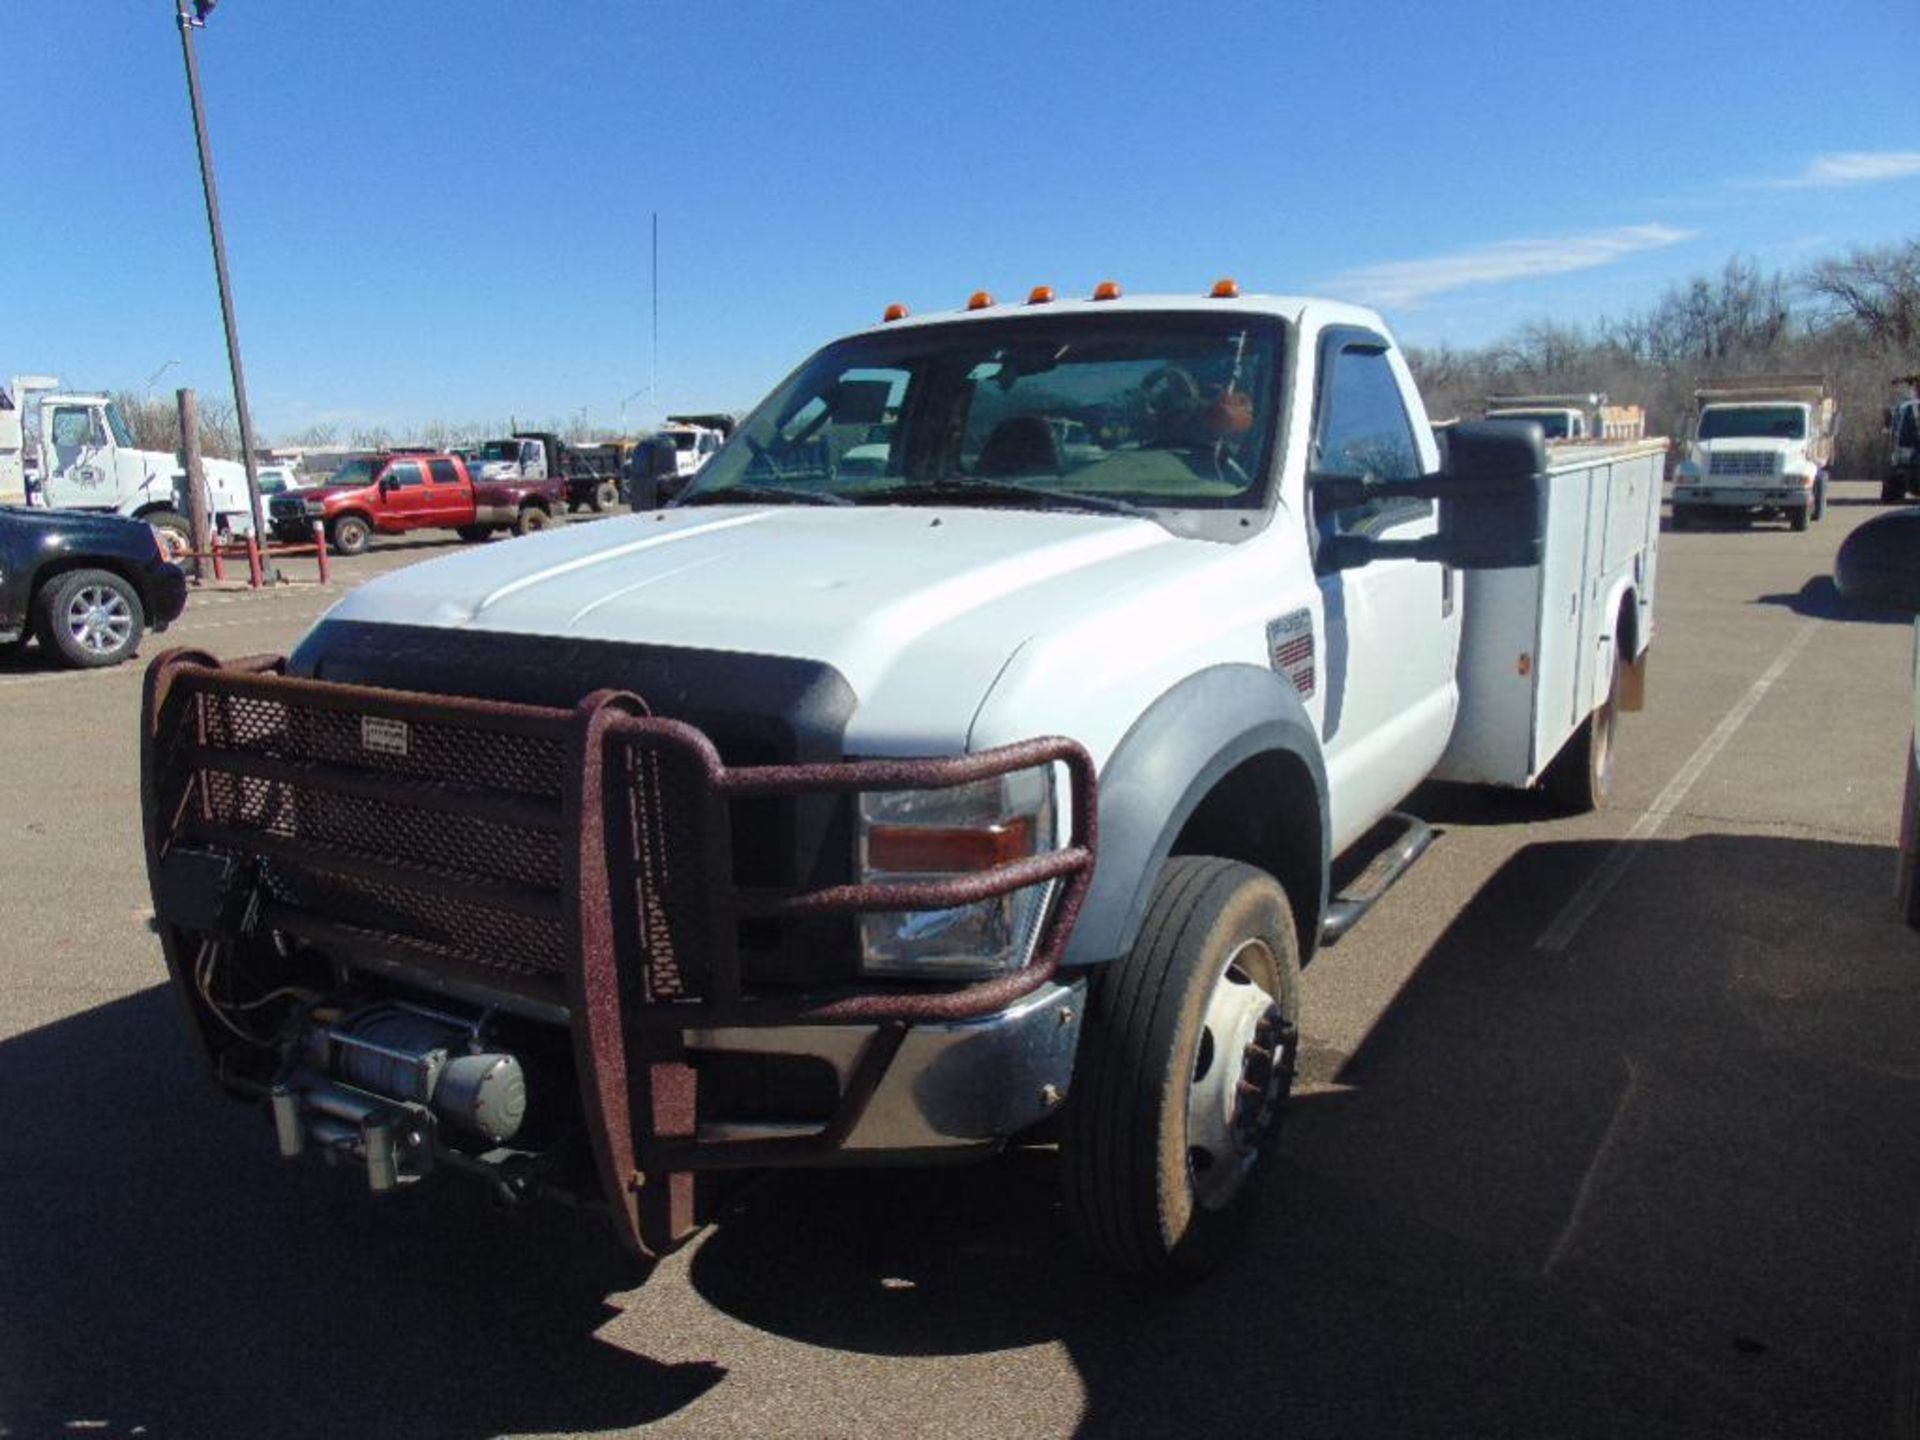 2008 Ford F450 Service Truck s/n 1fdxf46r88eb08550,pwr stroke eng,auto trans, winch, air compressor, - Image 2 of 4